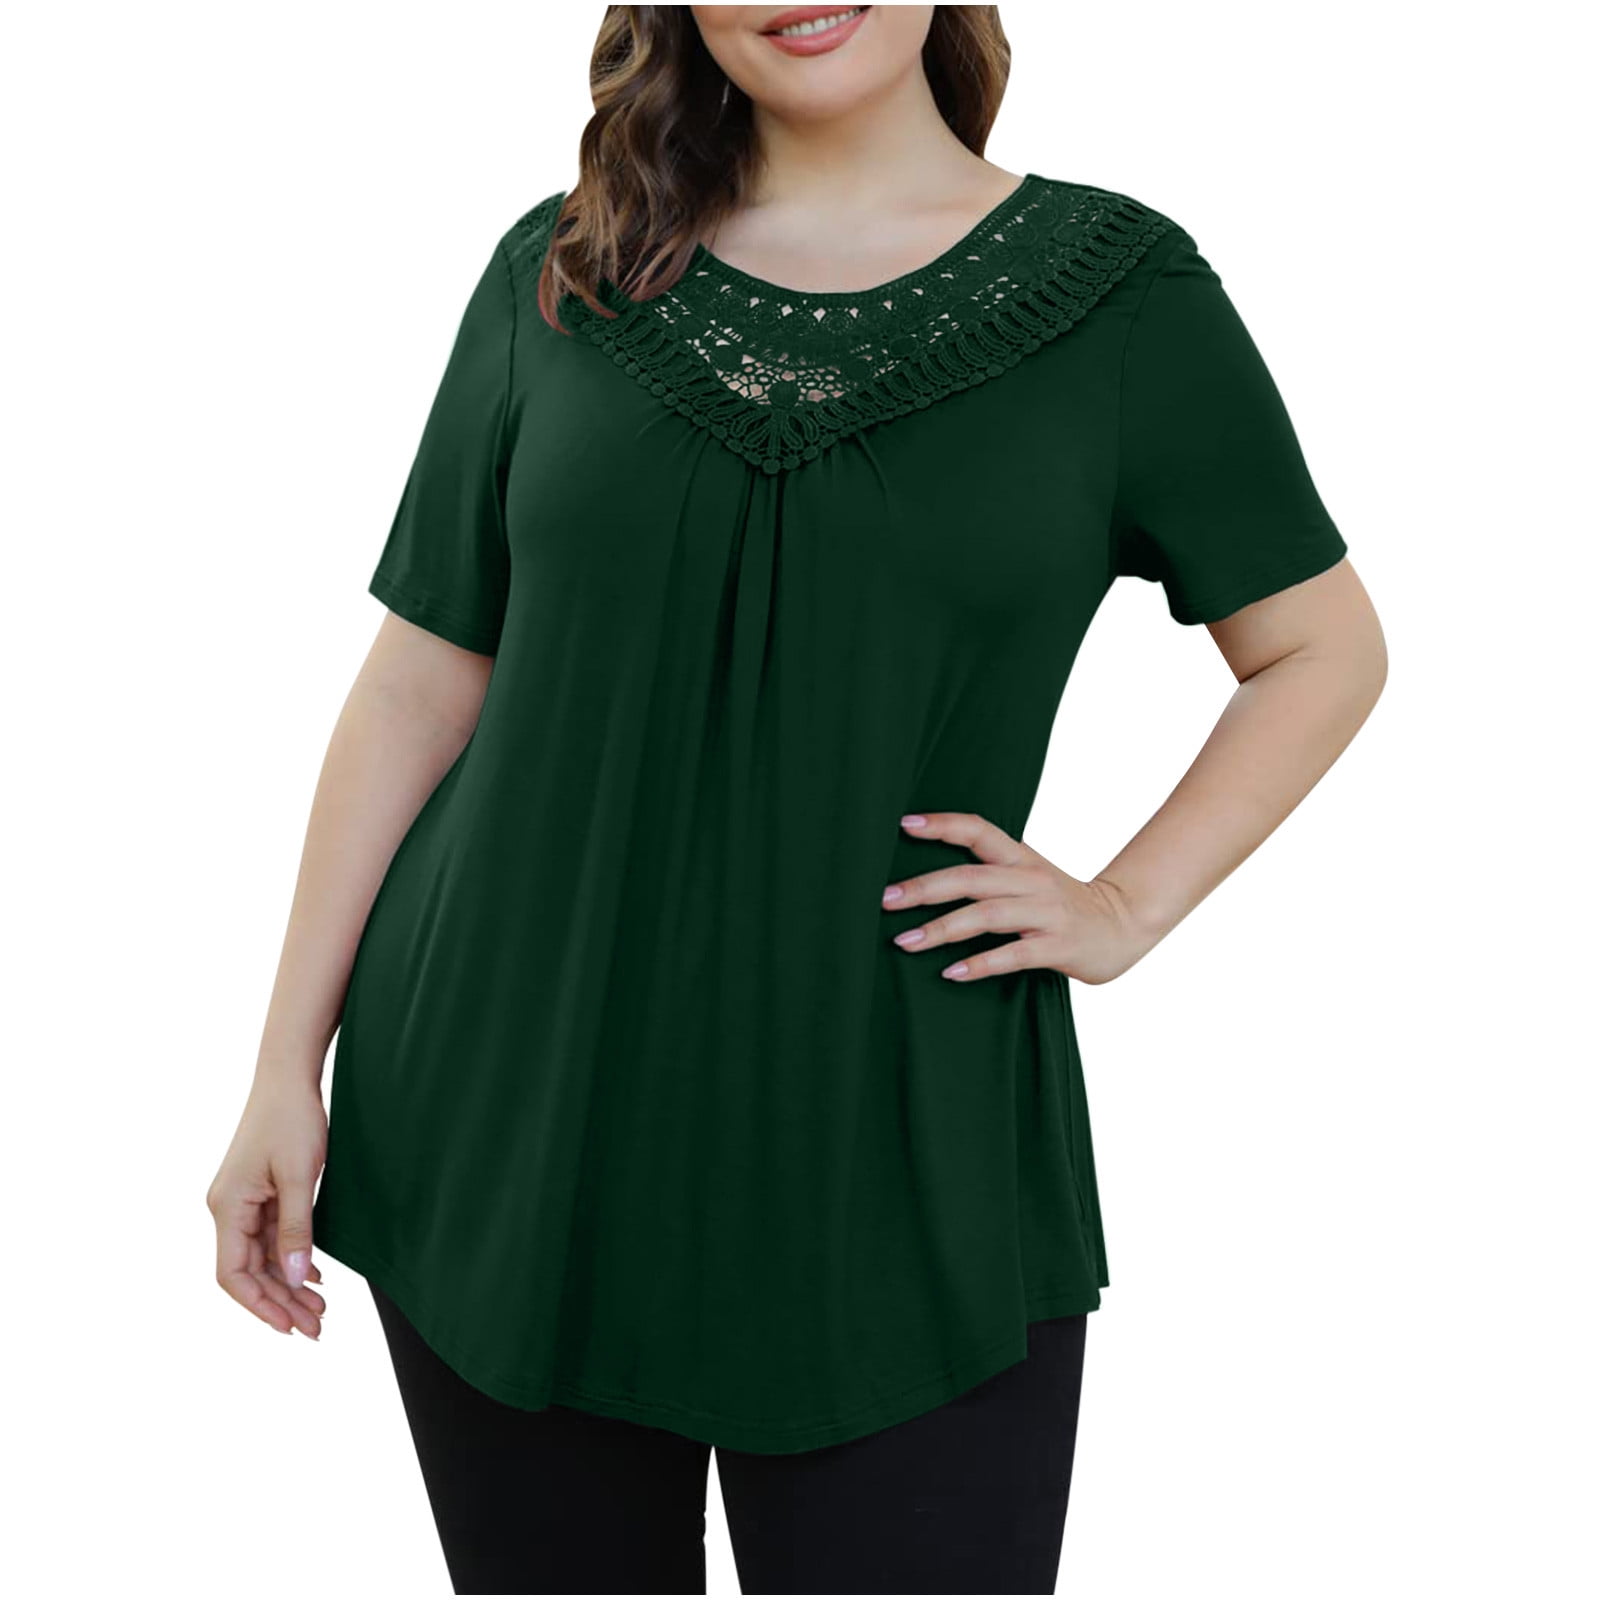 Beme Long Sleeve V Neck Woven Peasant Top Womens Plus Size Clothing Tops  Blouse